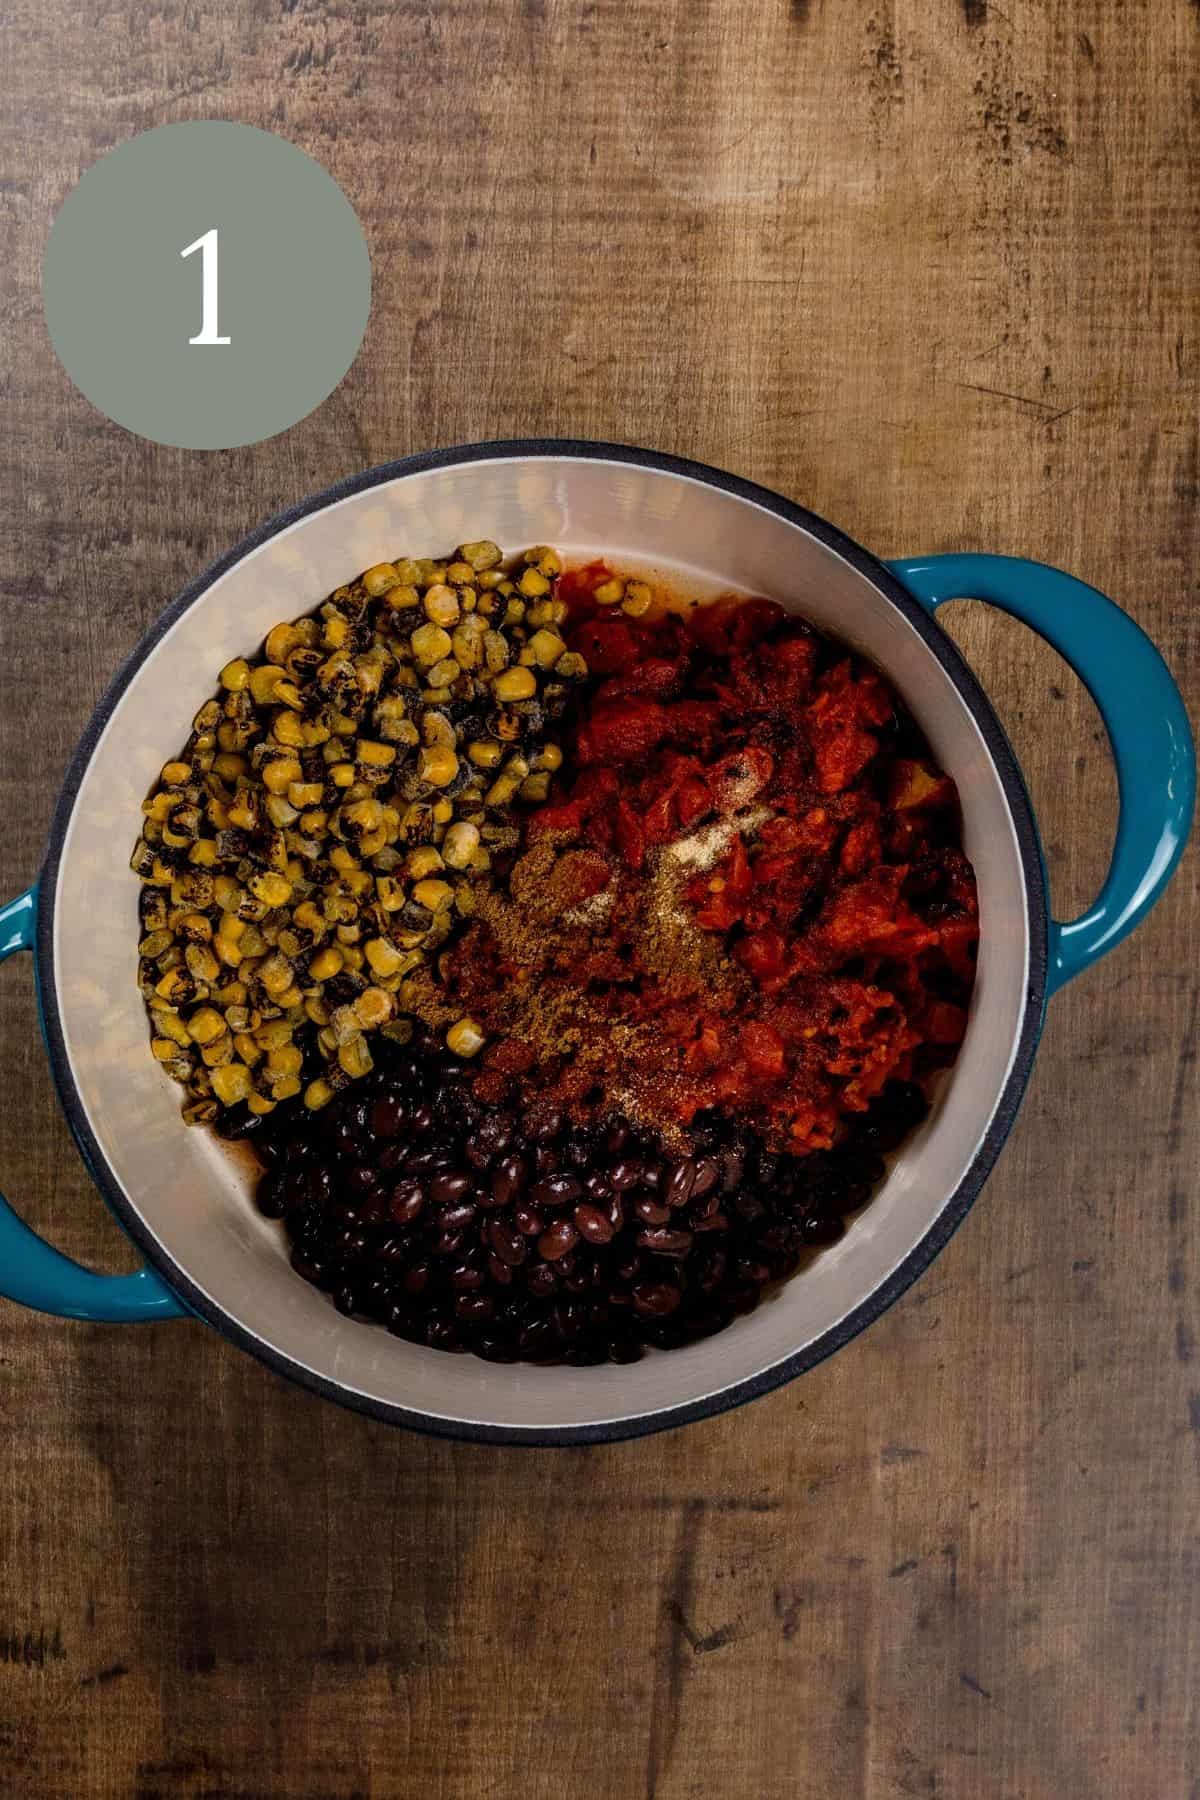 A blue ceramic cooking pot is on a wood table filled with the ingredients to make the bean filling for a burrito bowl. A green circle with the number 1 is in the top left corner.